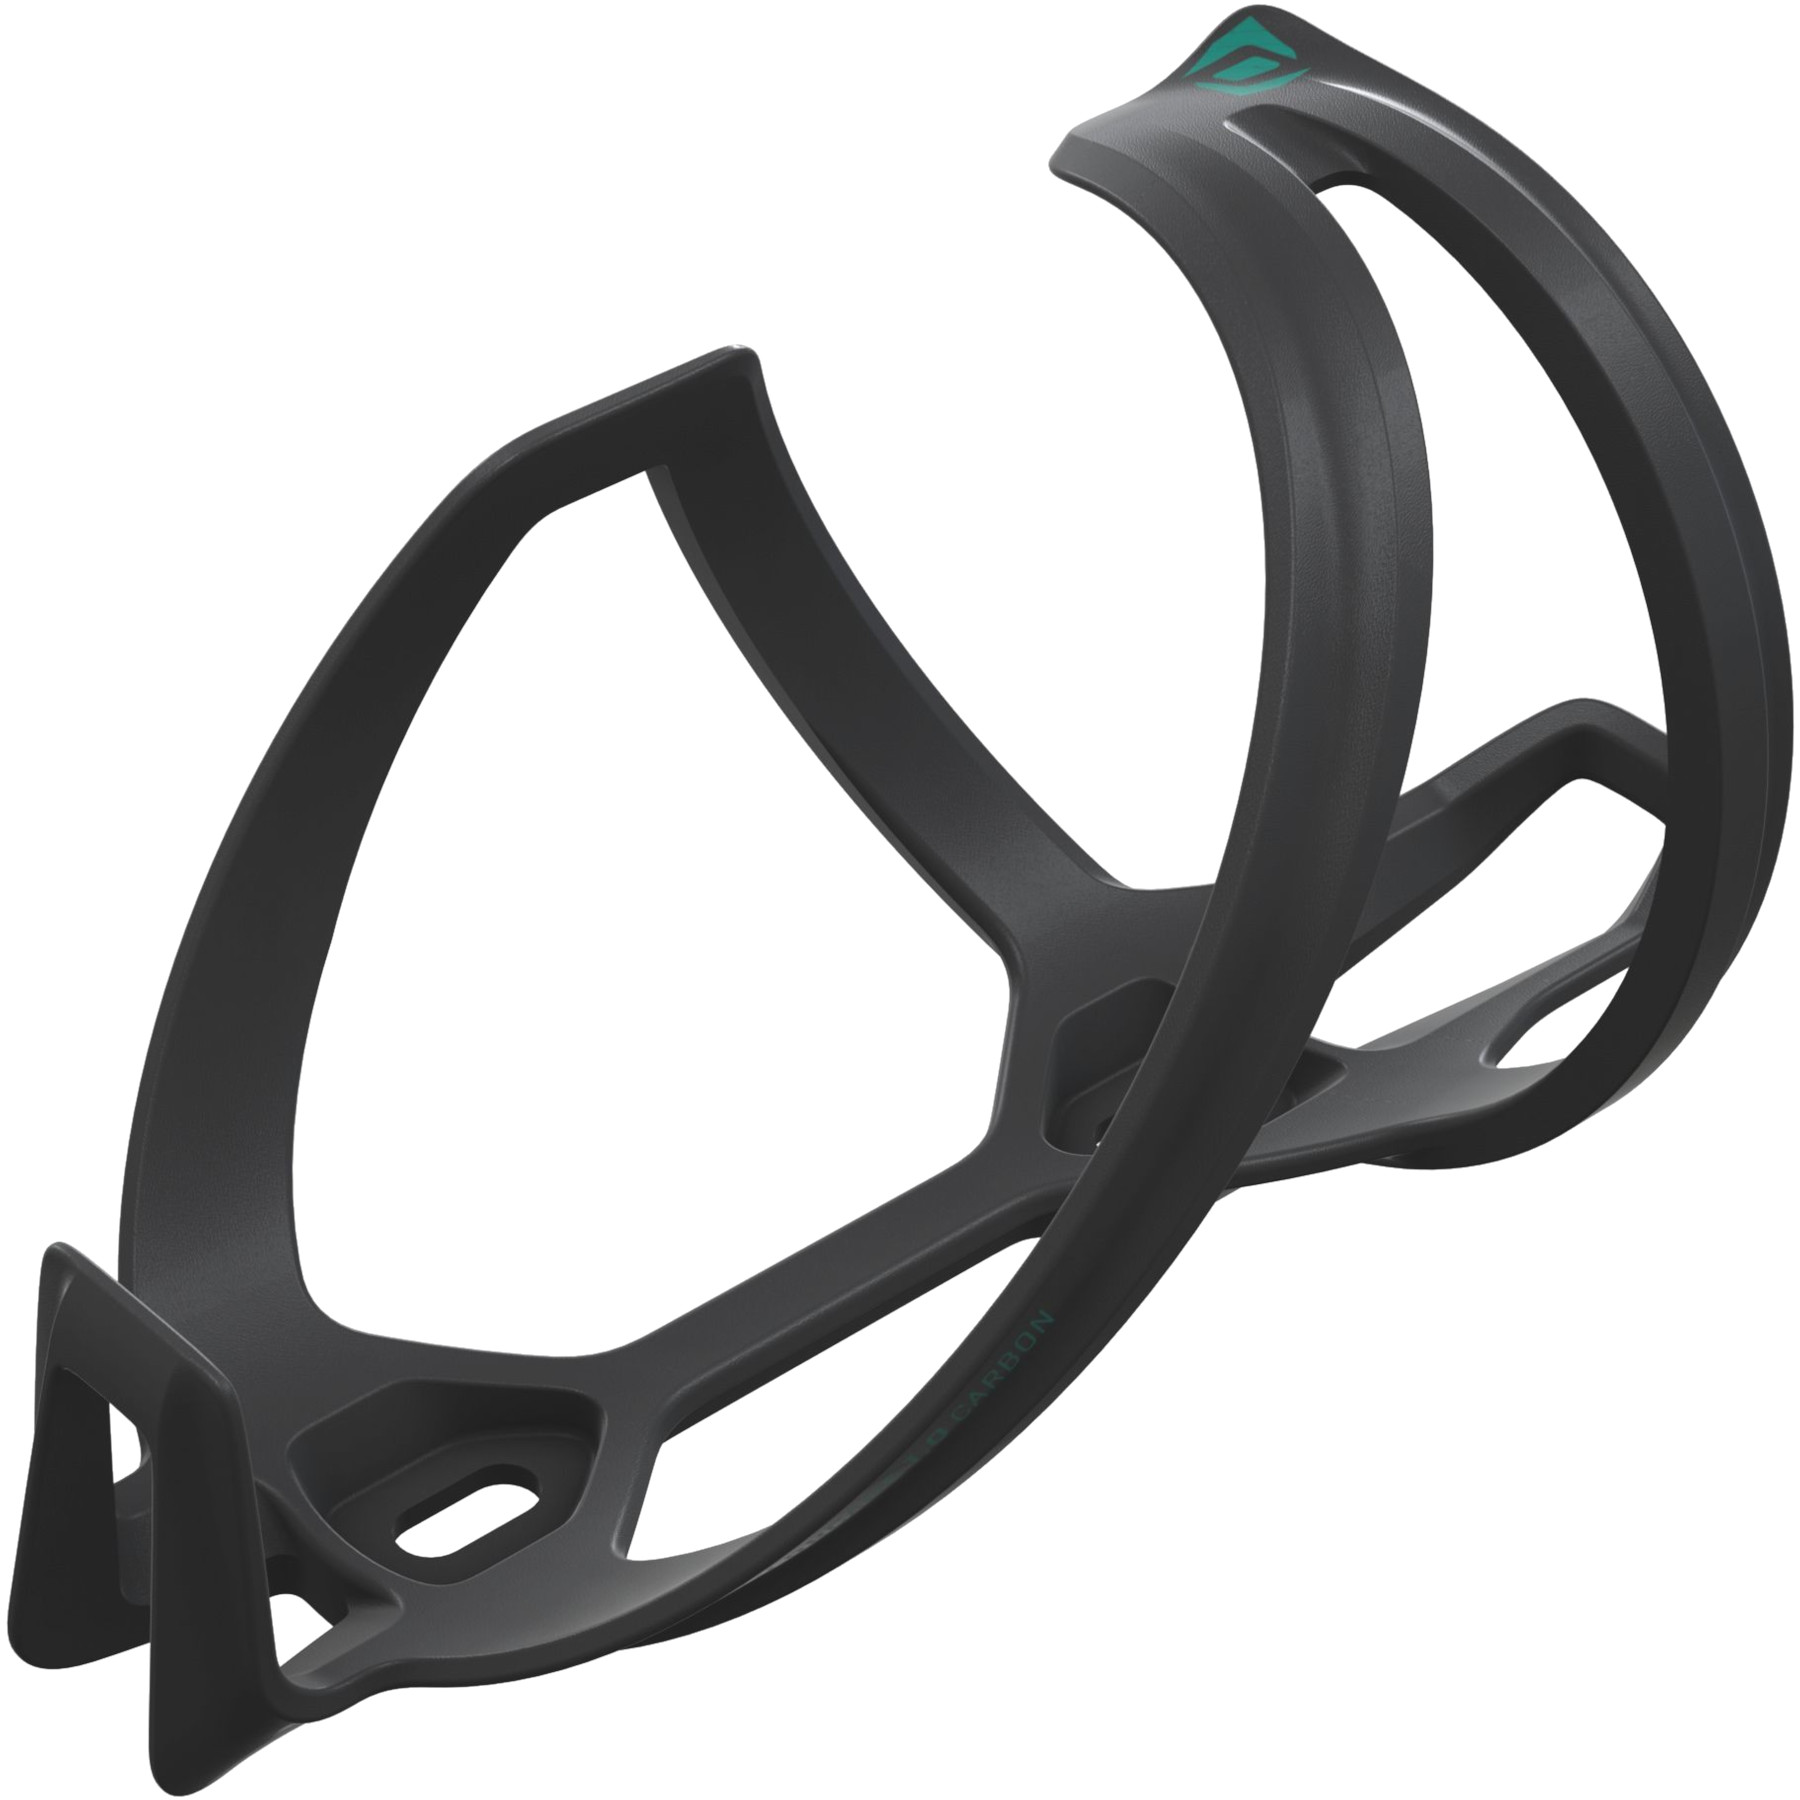 Picture of Syncros Tailor 1.0 Bottle Cage - left - black/teal blue